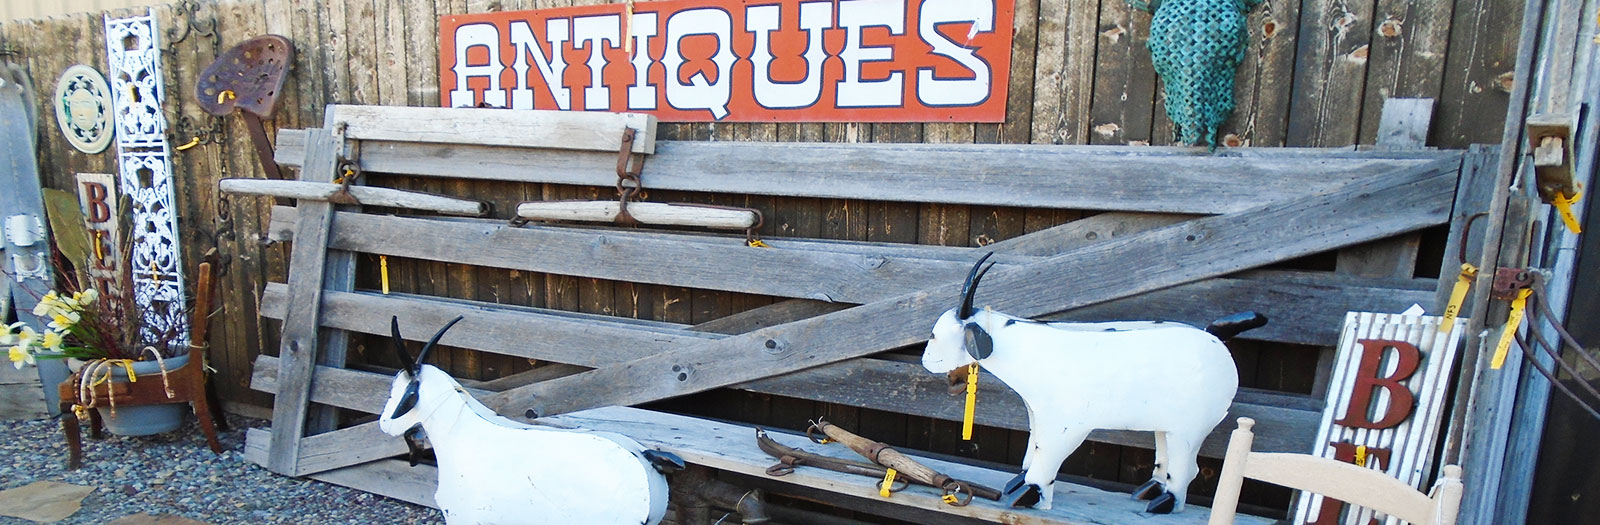 Southside Consignment and Antiques in Kalispell MT